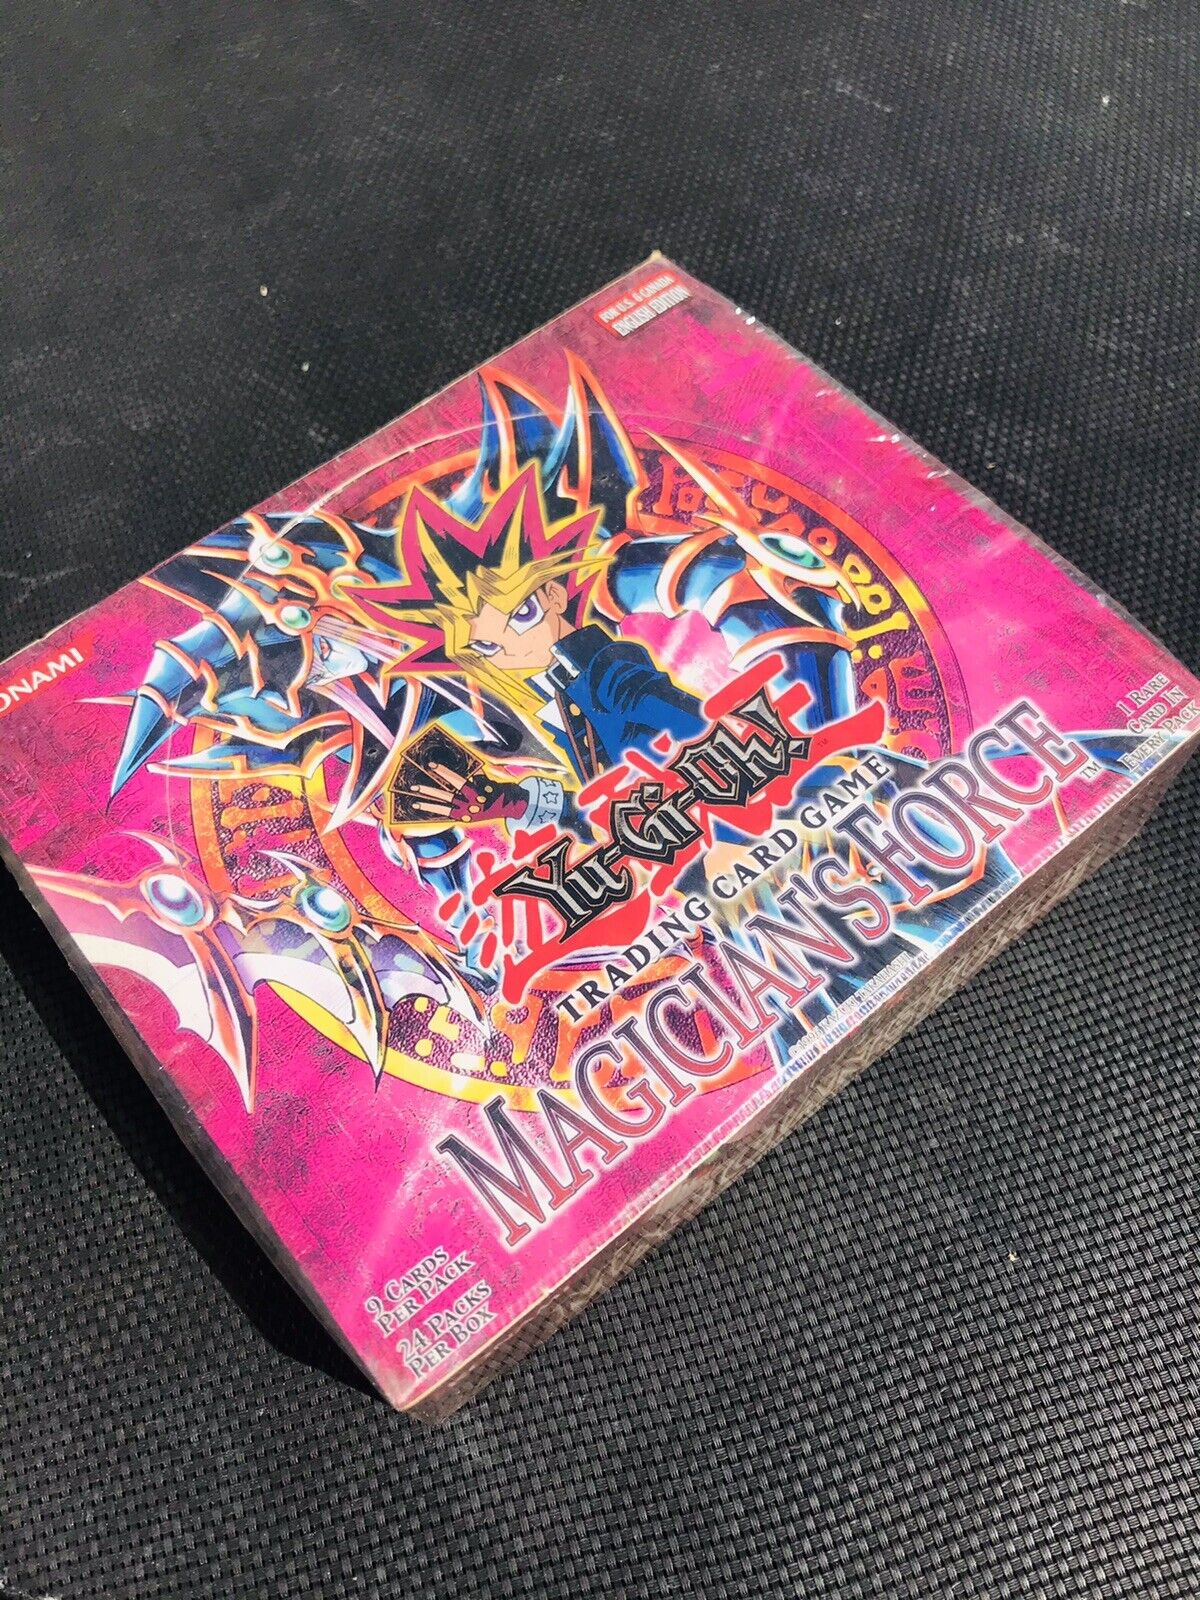 Yugioh Magician’s Force booster box Unlimited  24 count Booster Box OG Sealed